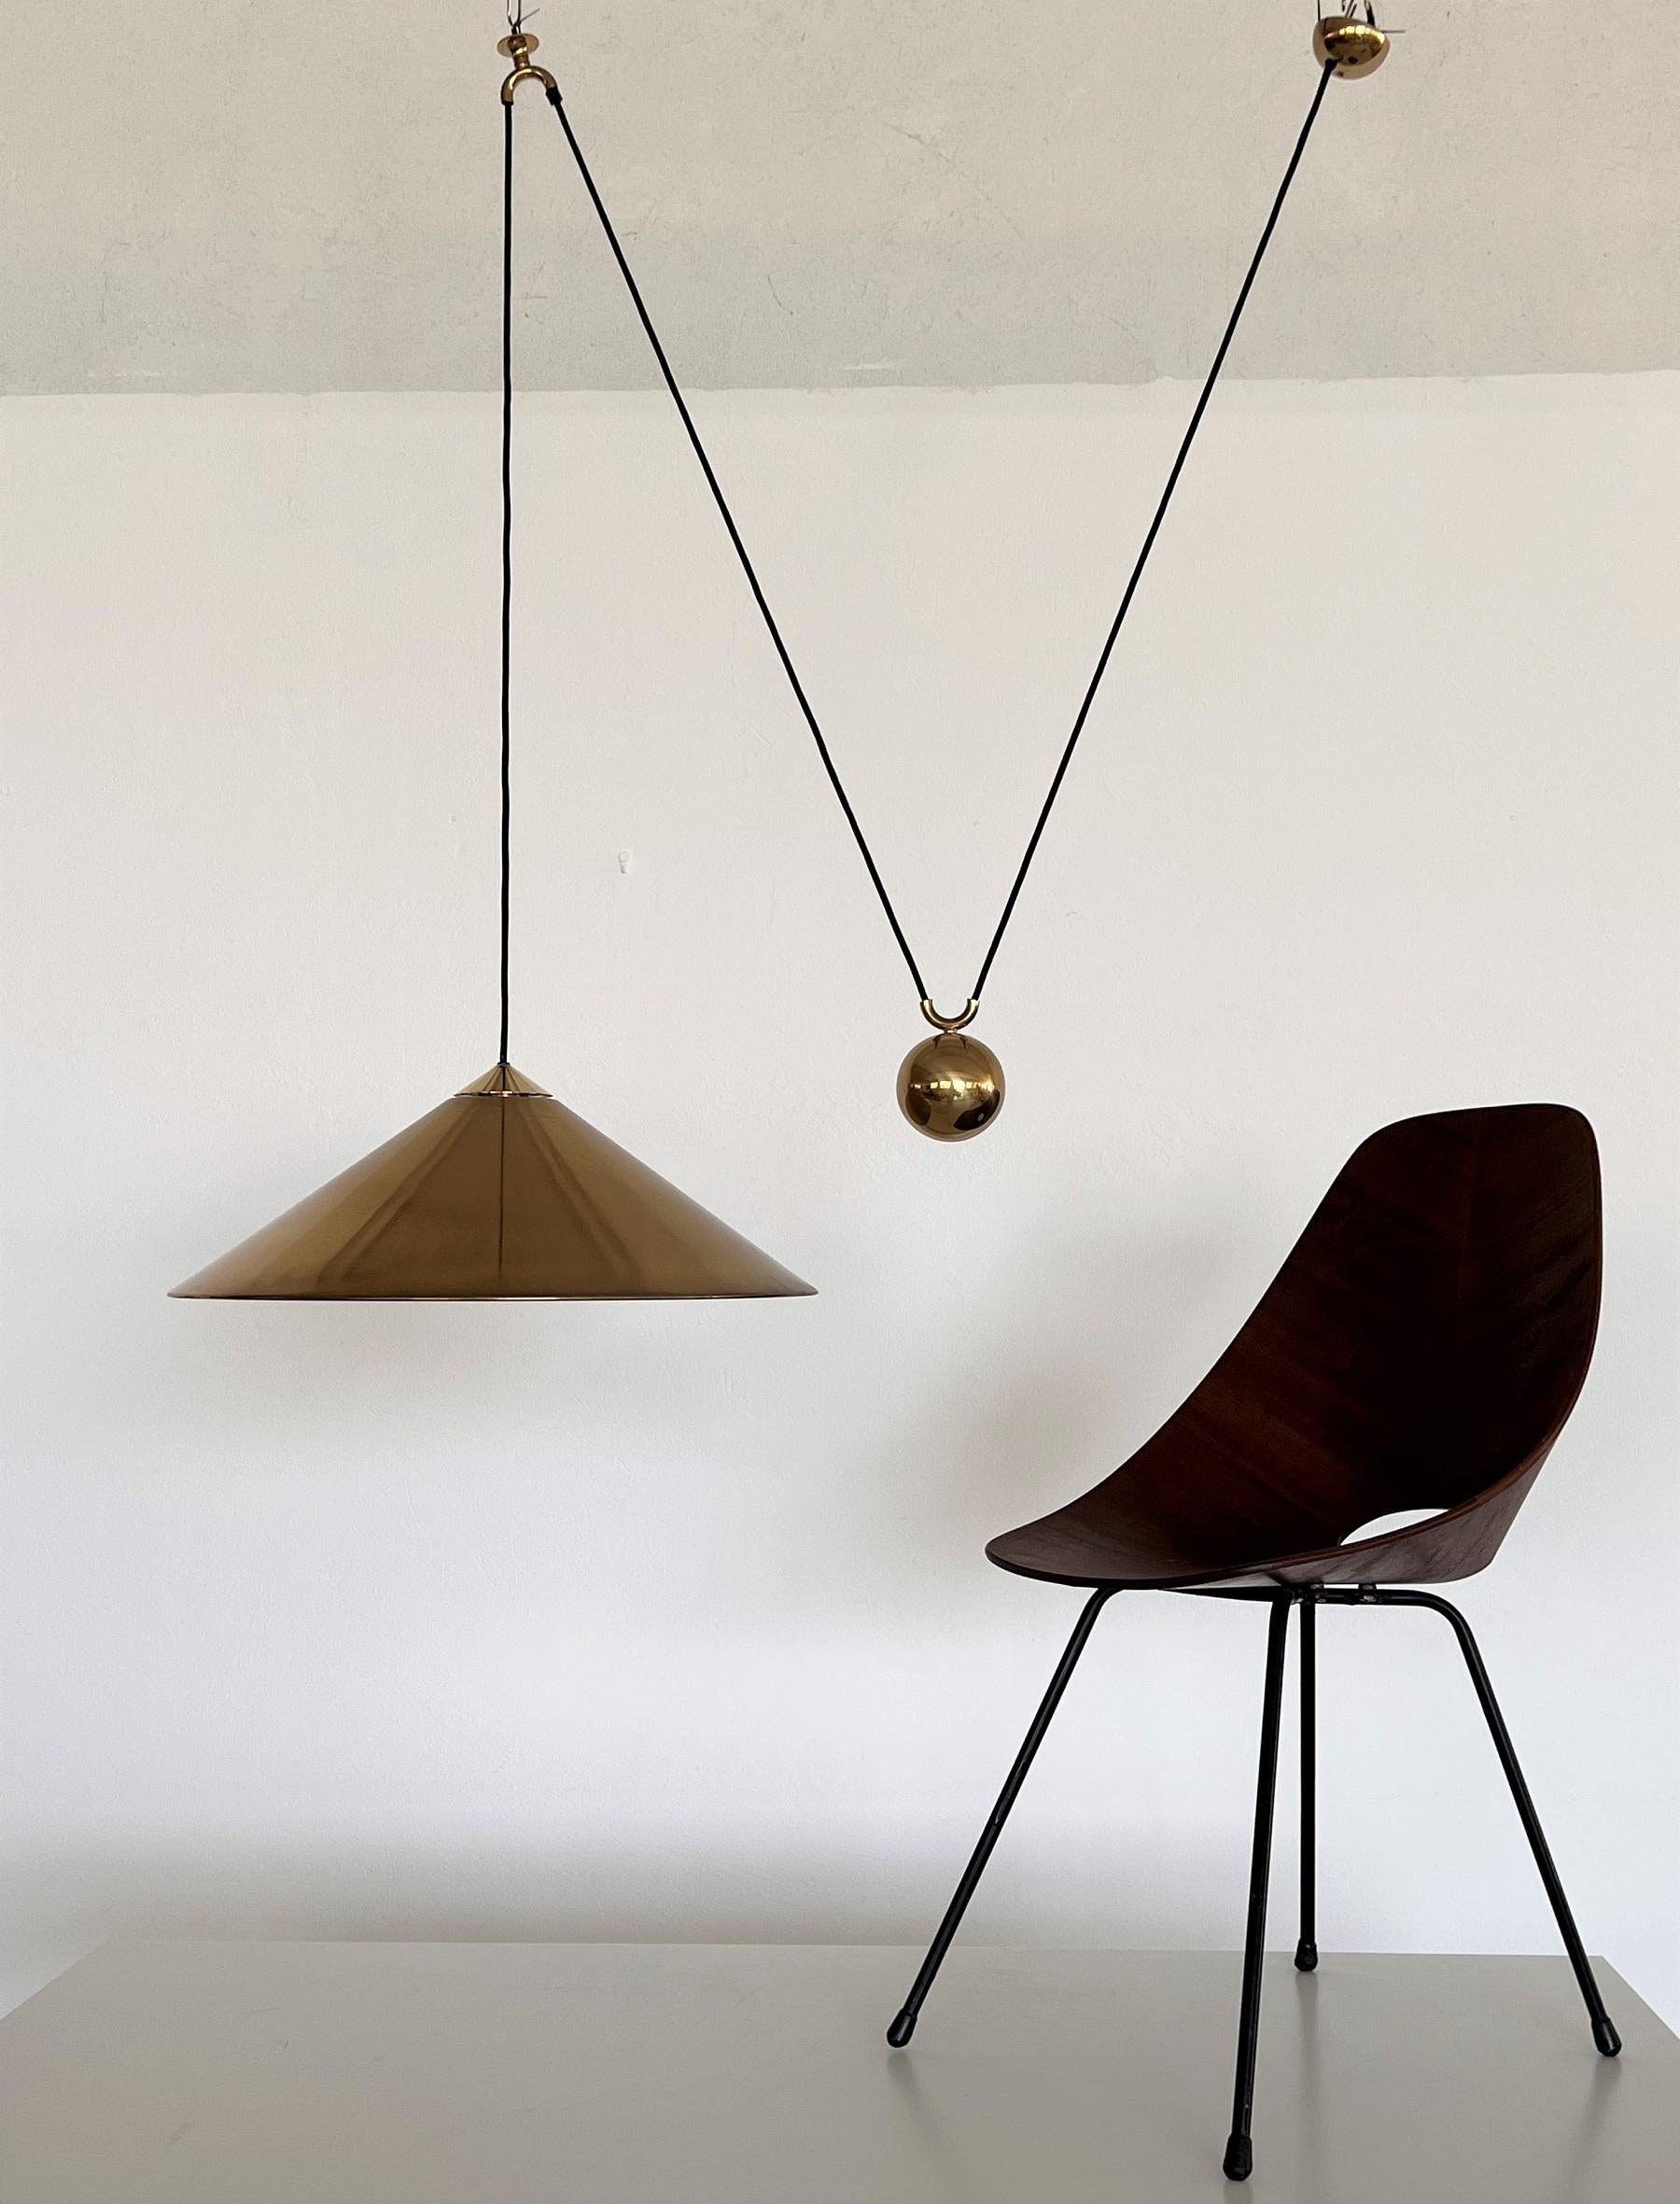 Elegant, rare and early version of large counter balance pendant light, named KEOS, by Florian Schulz, made in Germany in the 1970s. Out of production for decades.
The pendant lamp is adjustable in height from 31,5